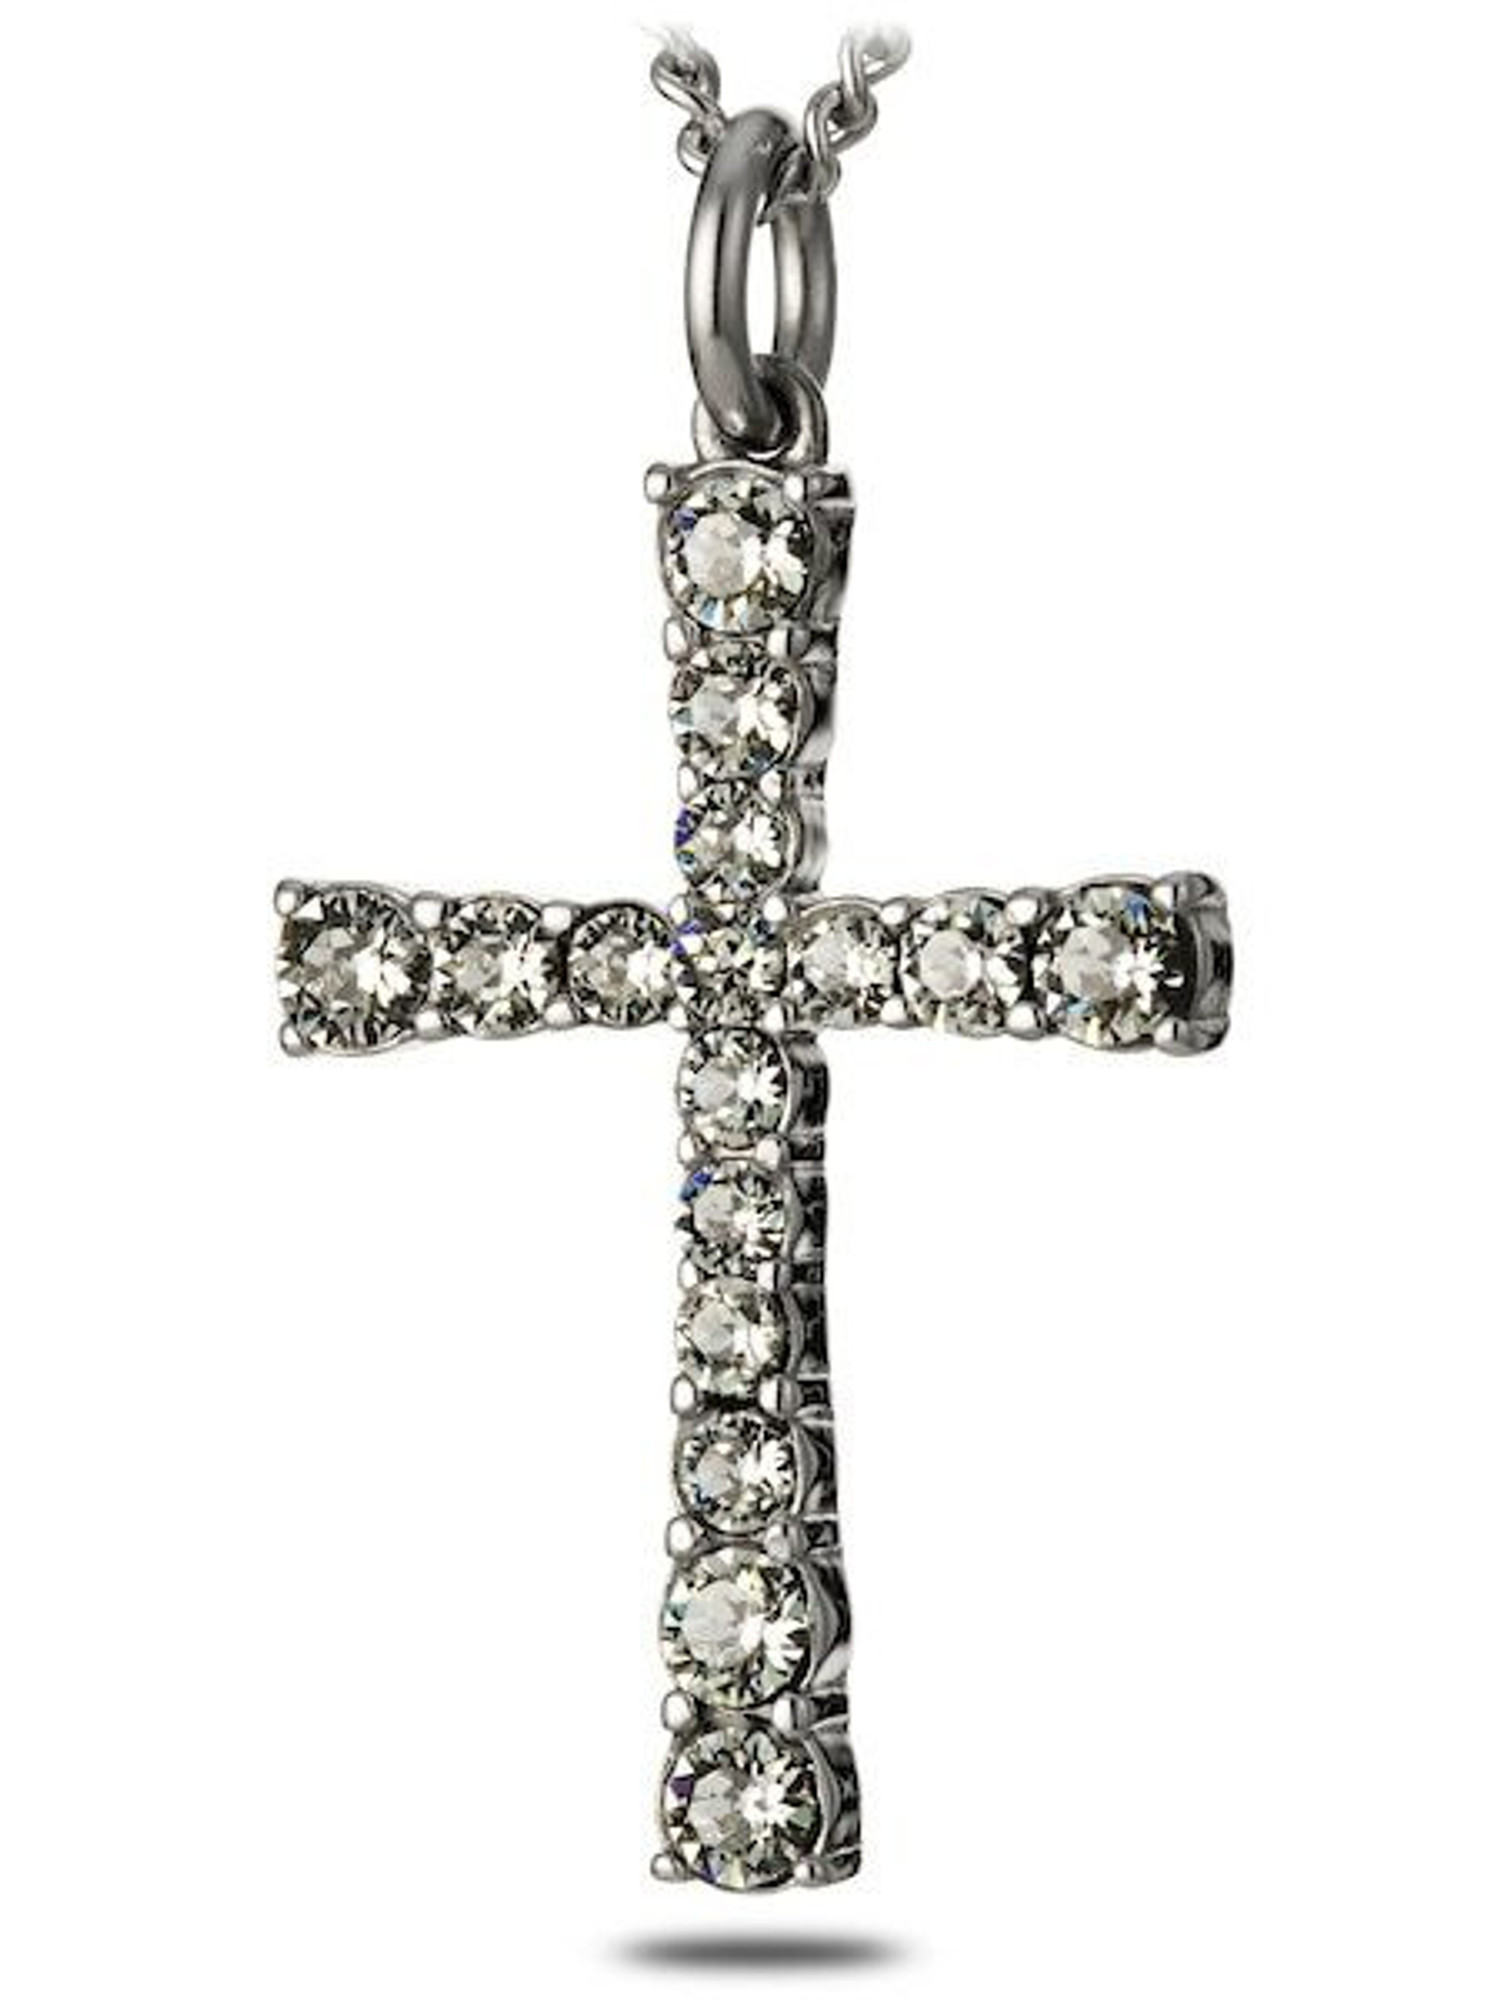 Crystal Cross Pendant with Sterling Silver, Large - Ghirelli Rosaries